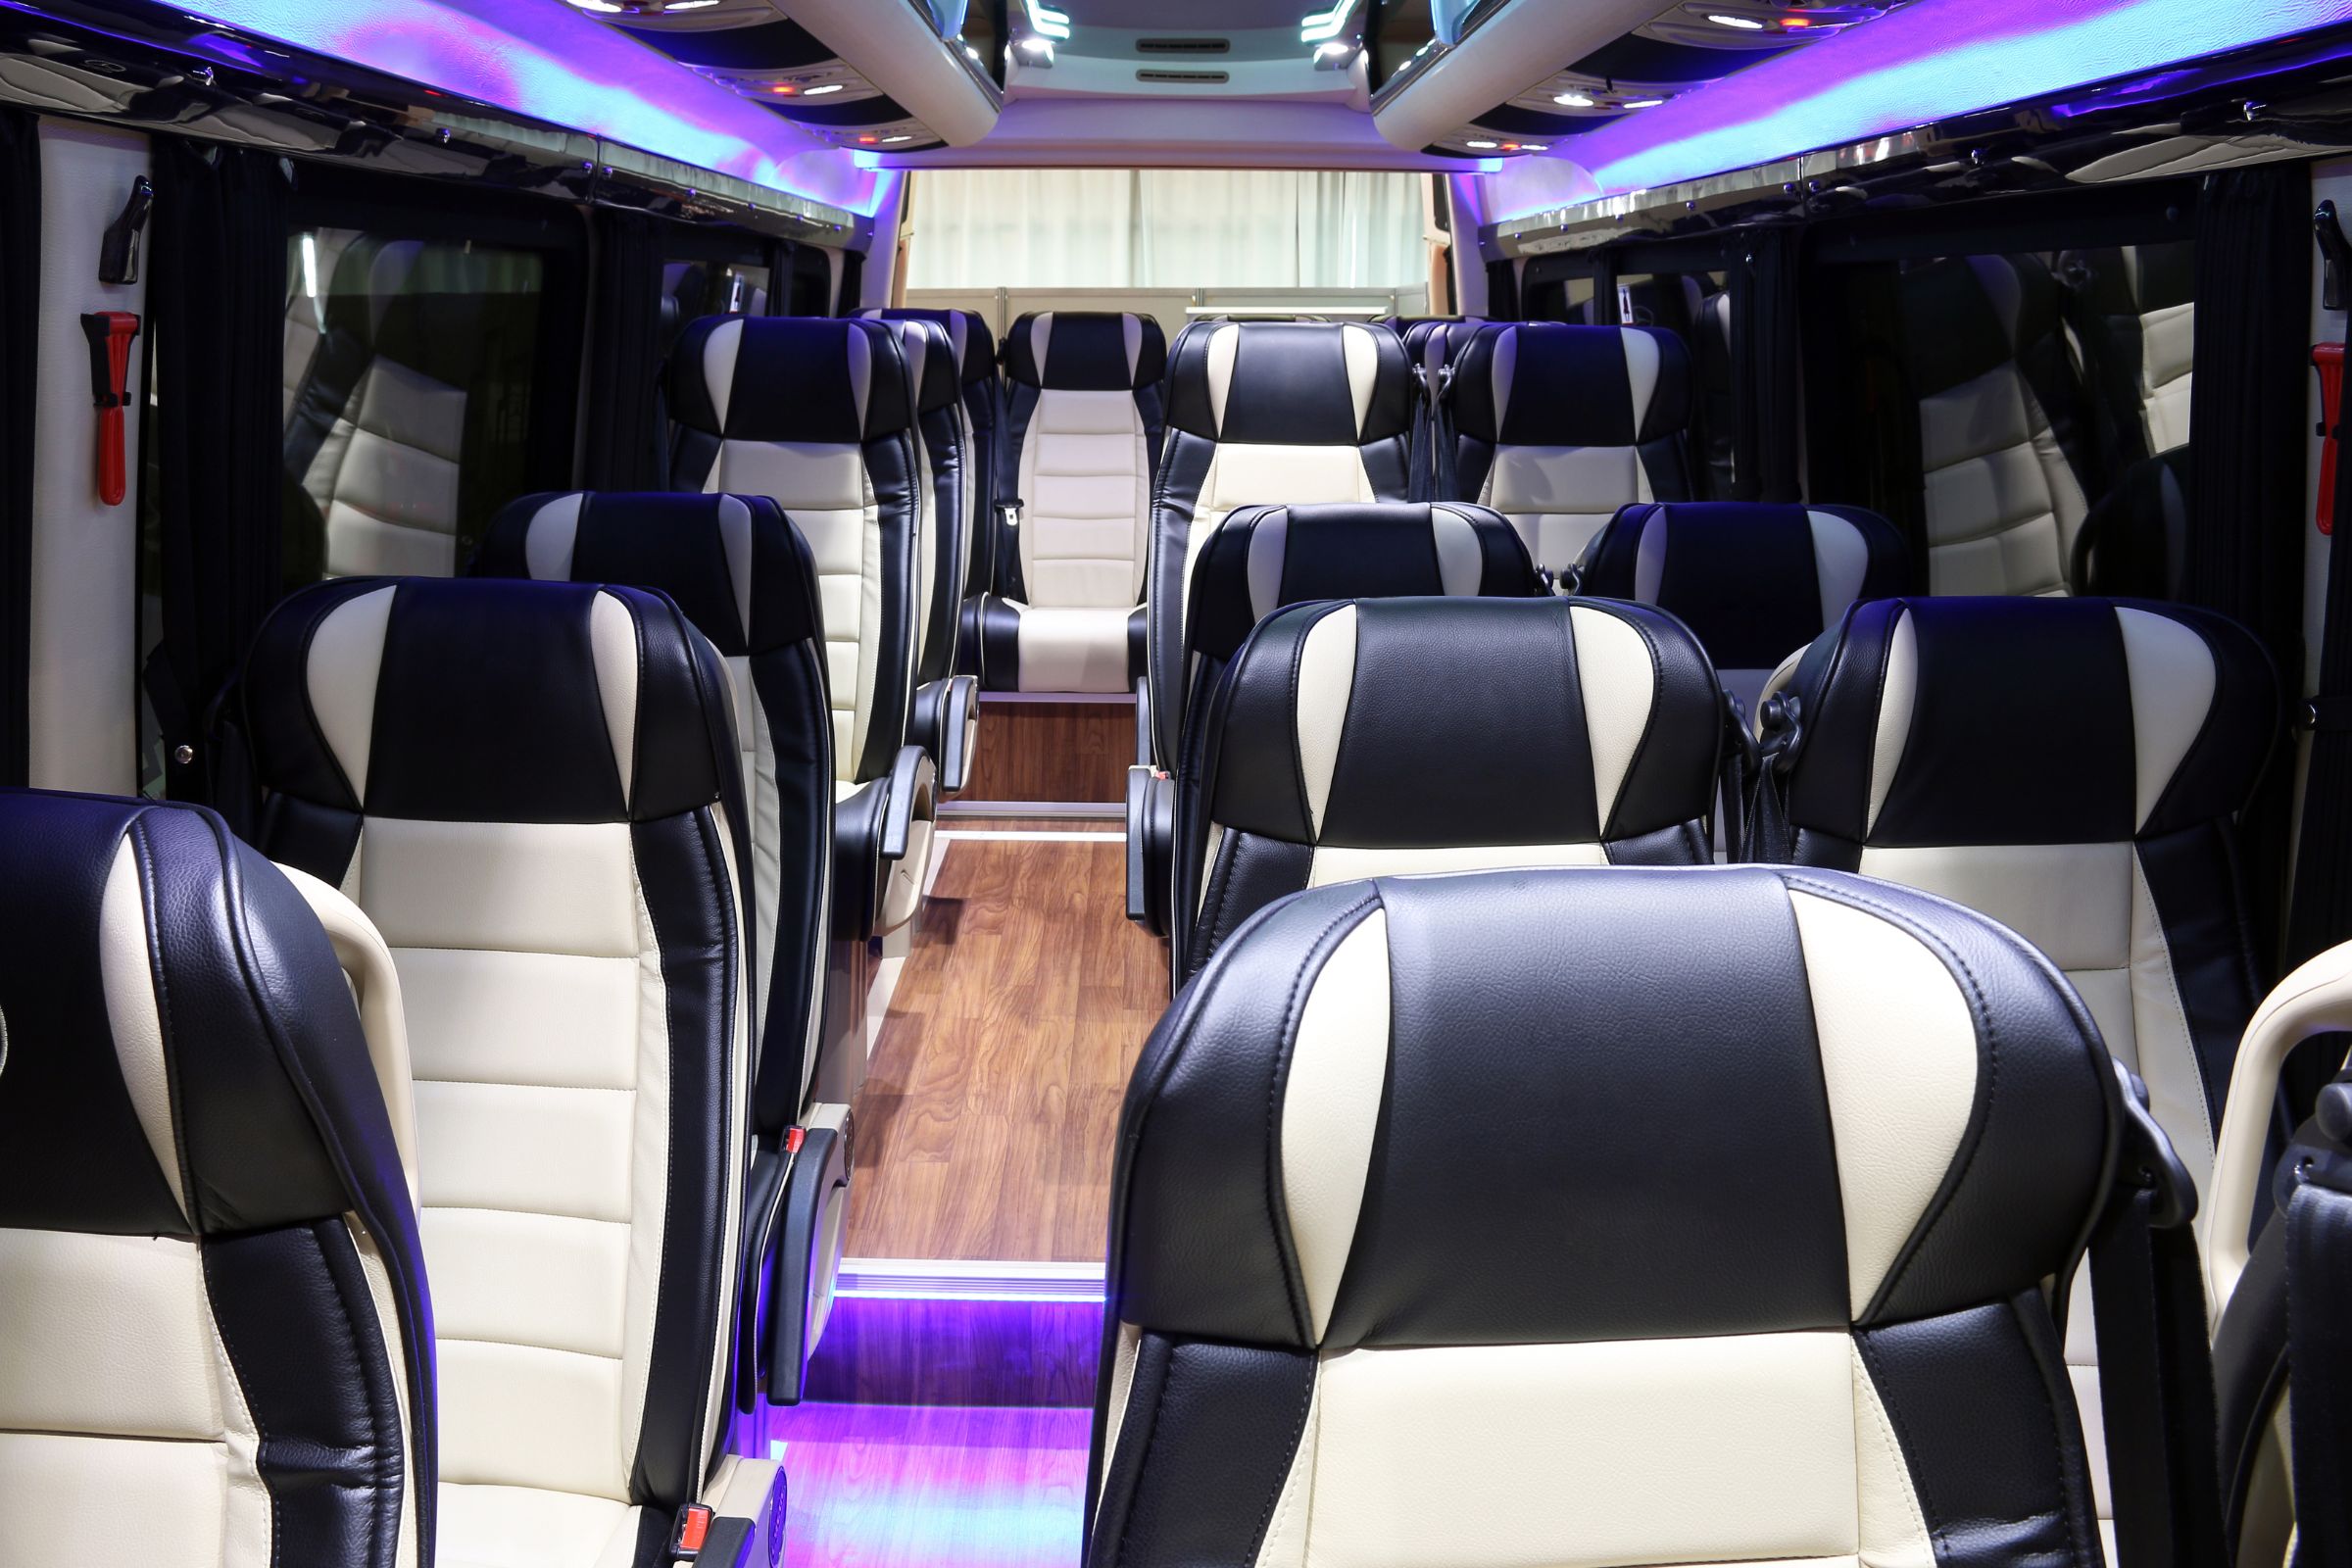 Reasons to Choose a Party Charter Bus for Prom or Graduation